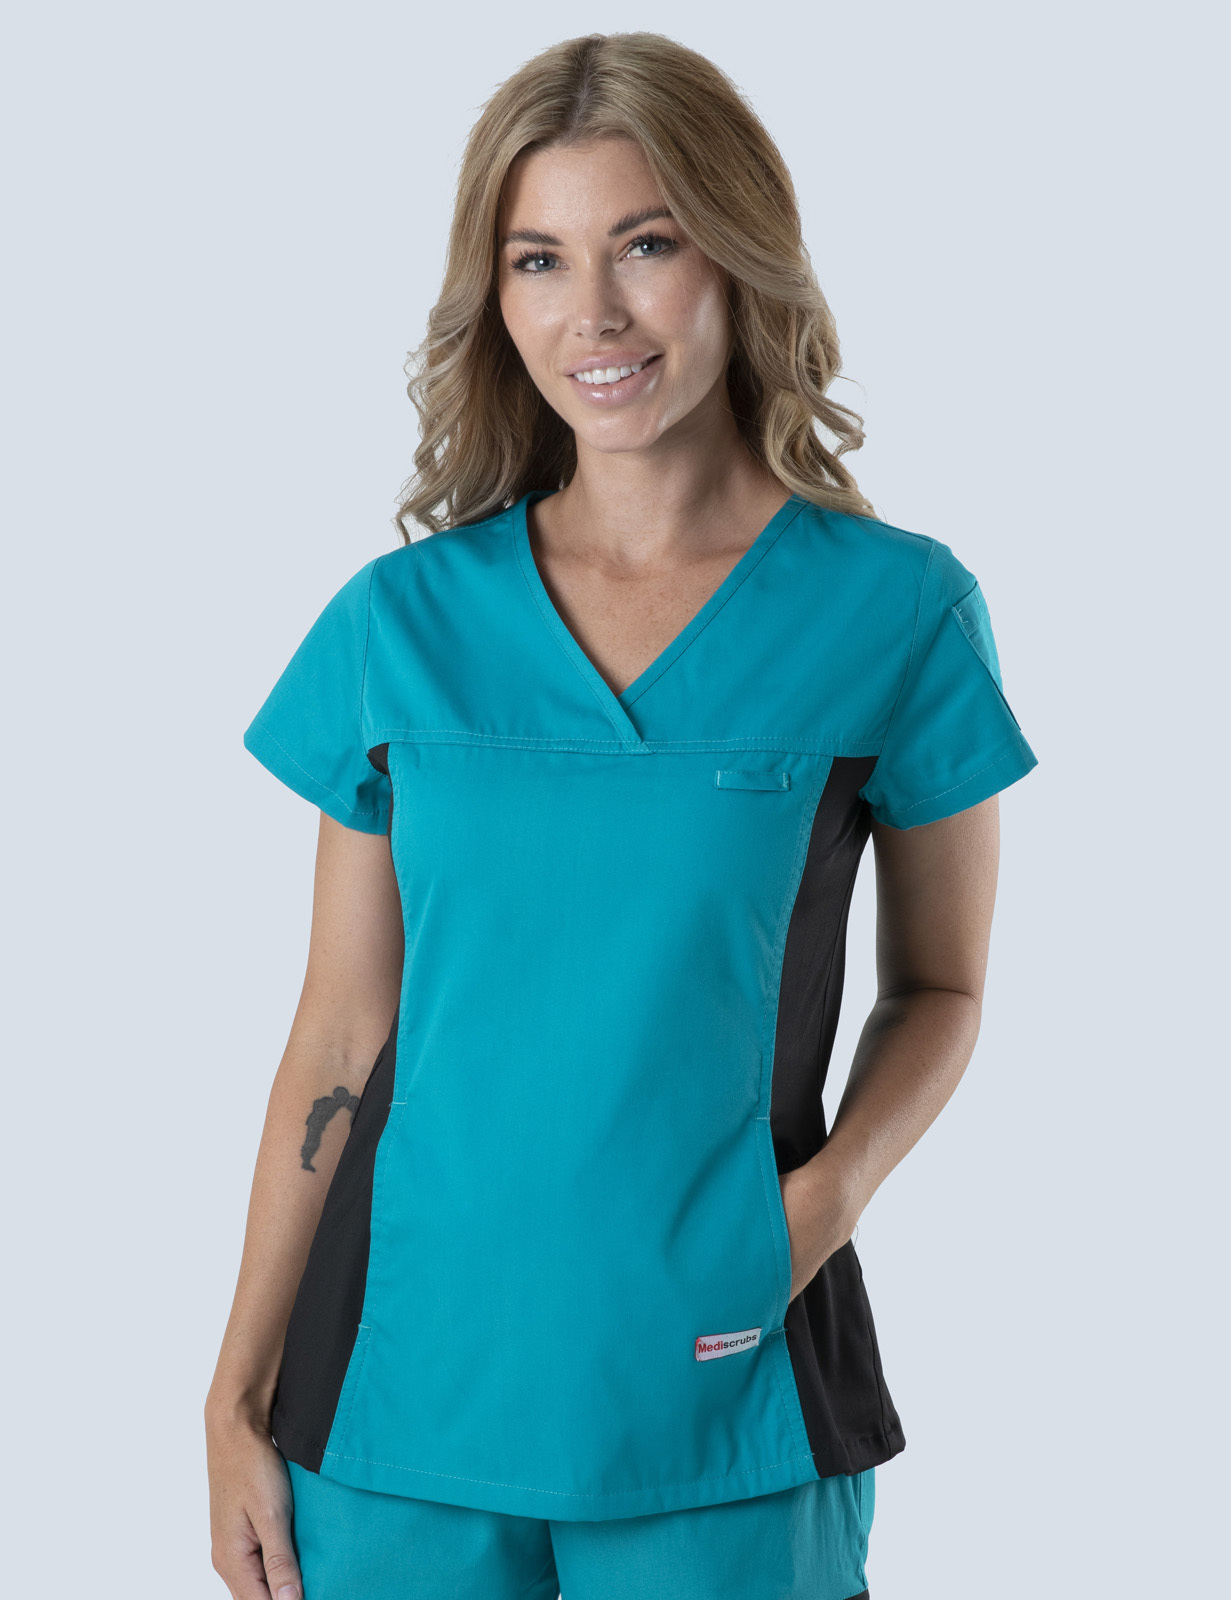 Pathology North - Mid North Coast (Women's Fit Spandex Scrub Top in Teal incl Logos)